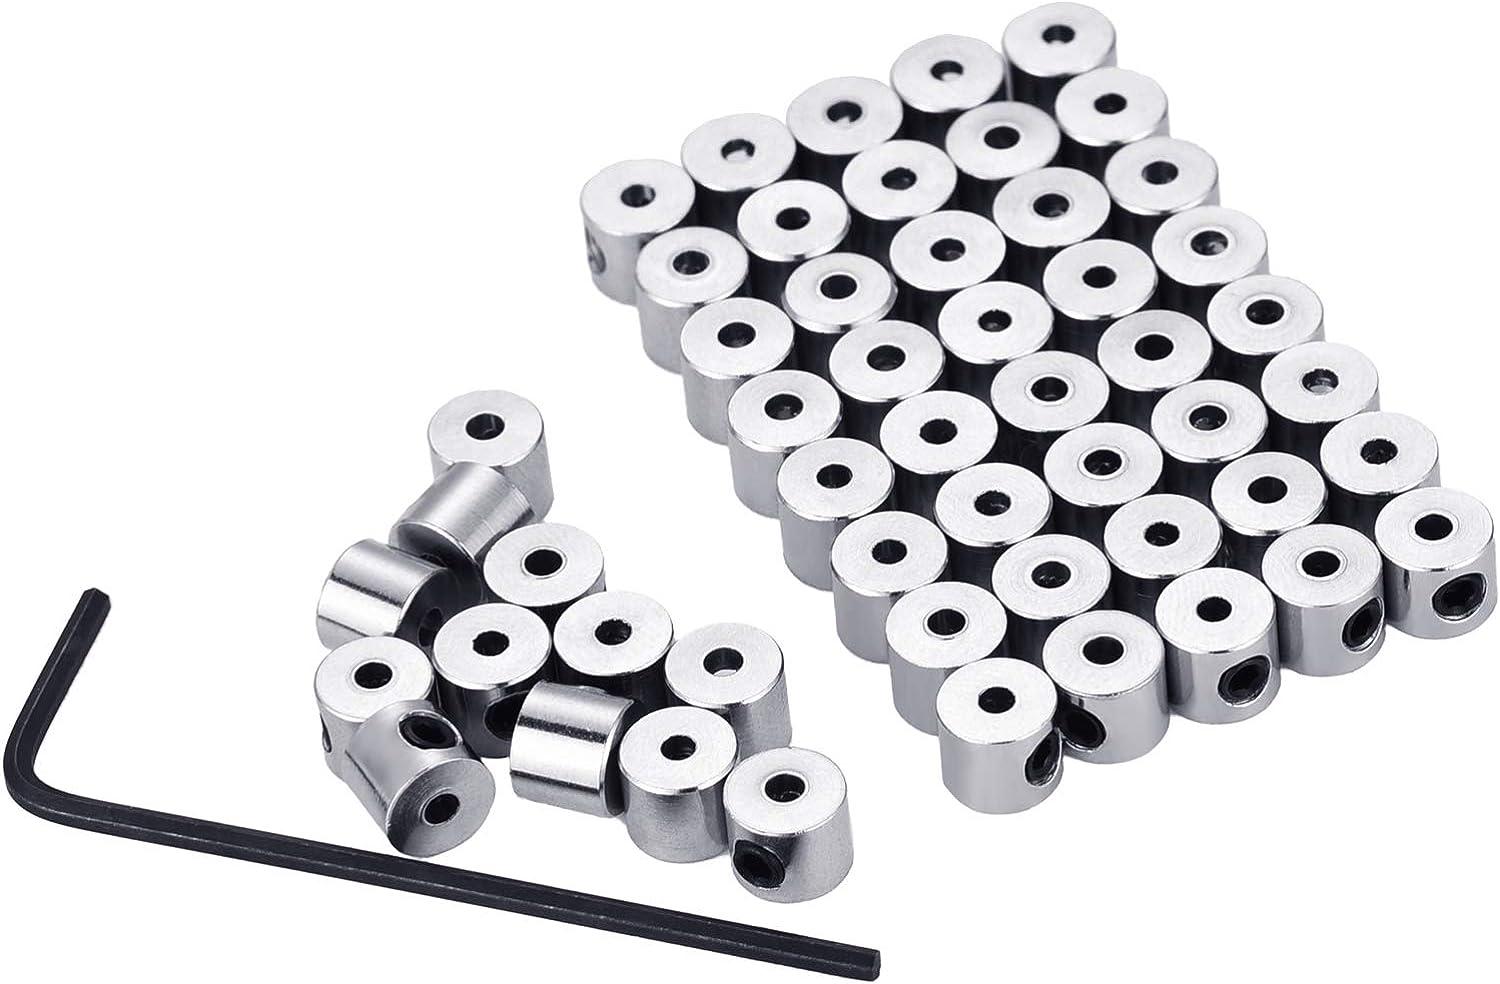 Mudder 30 Pieces Locking Pin Keepers Backs, No Tool Required (Silver)